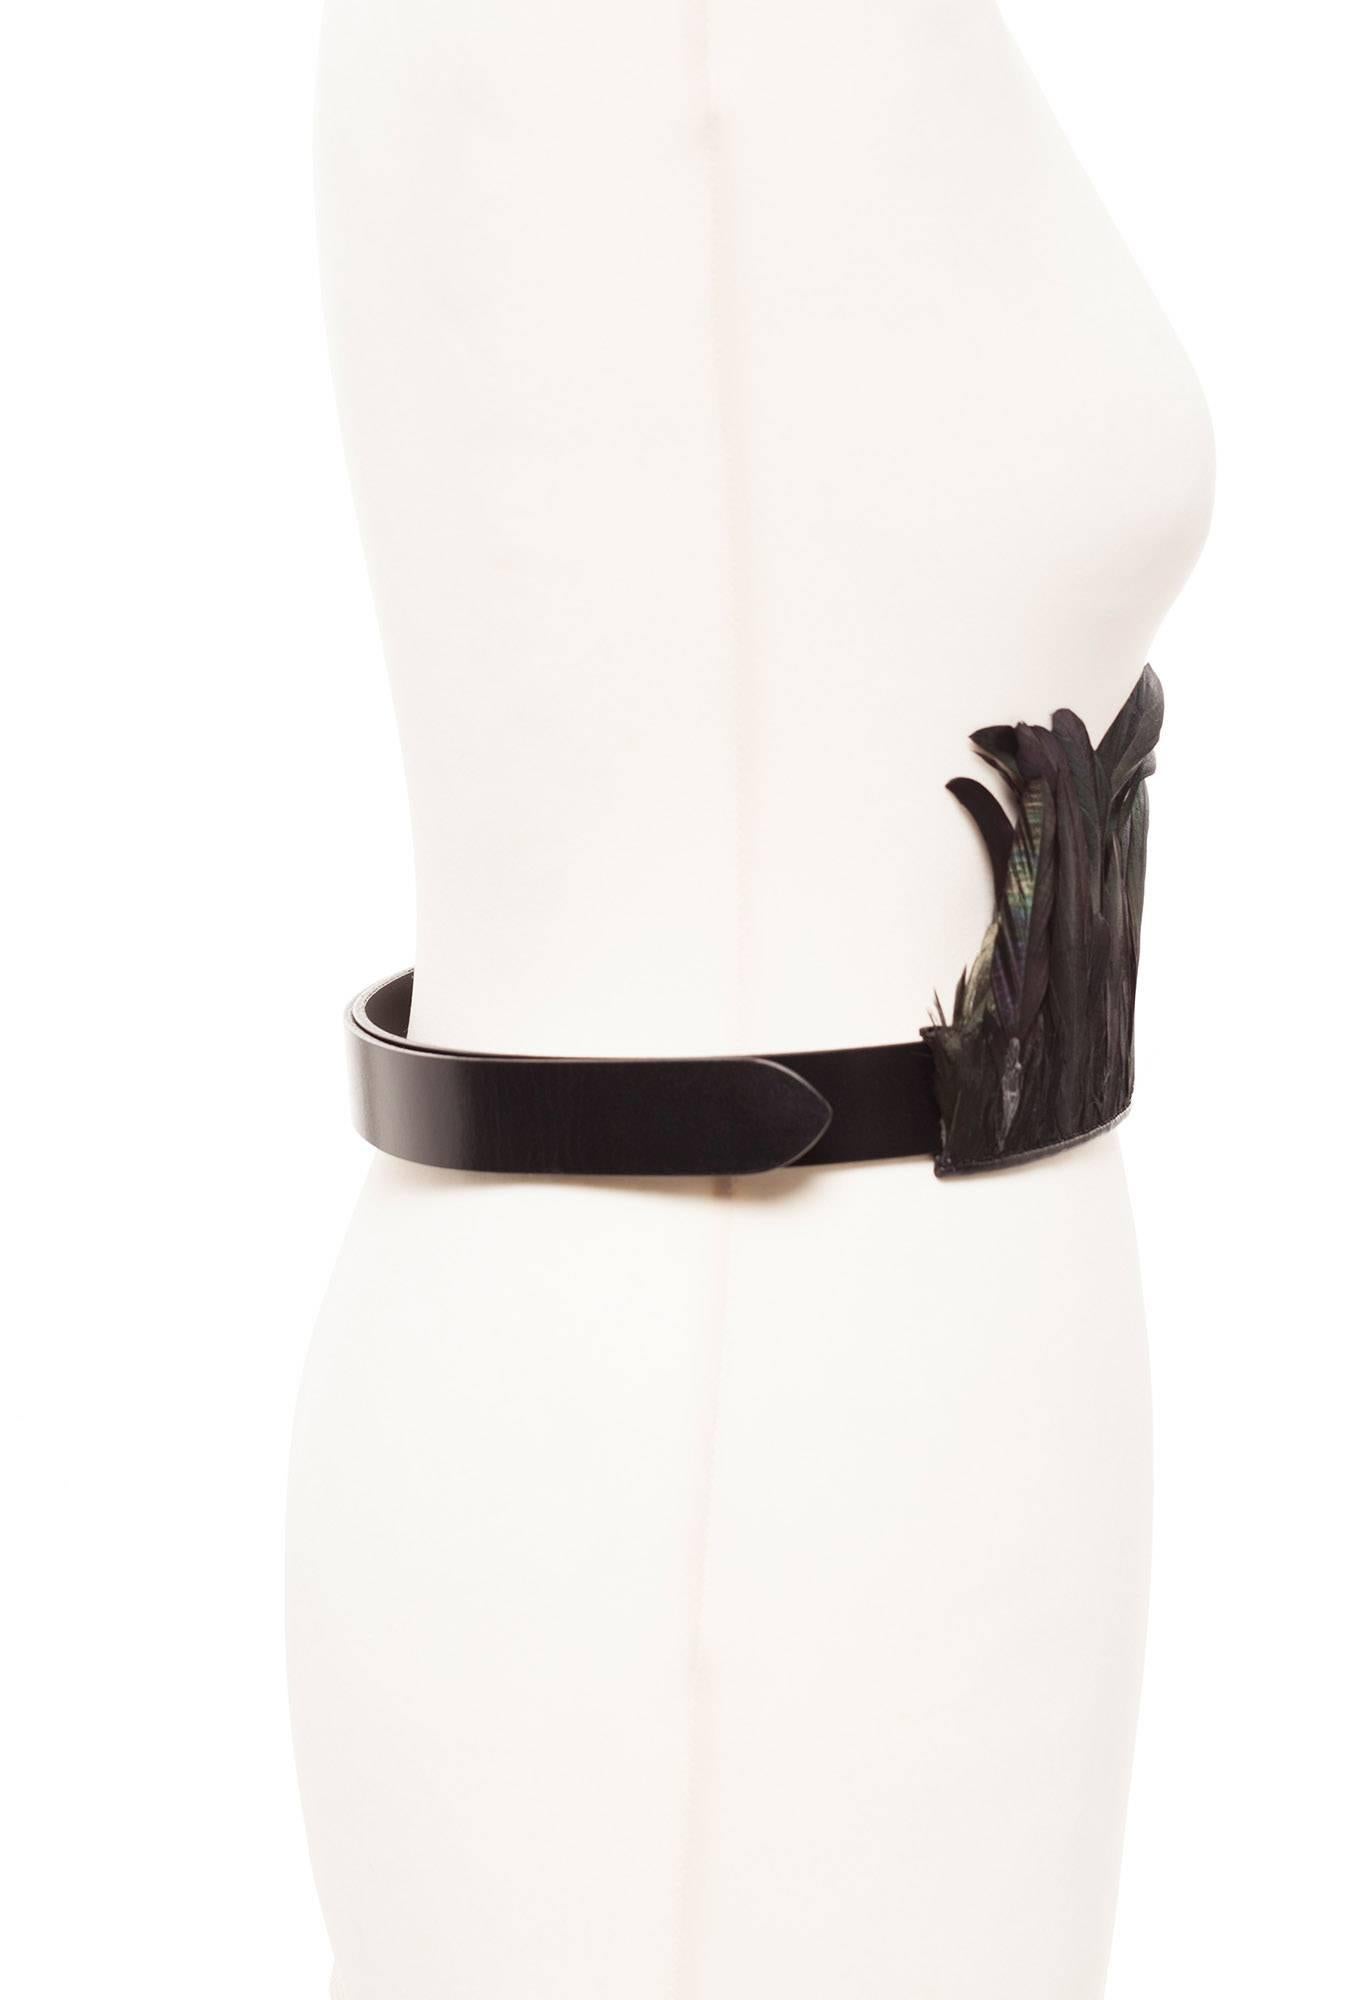 Martin Margiela leather belt with feather front detail, Sz. M 1